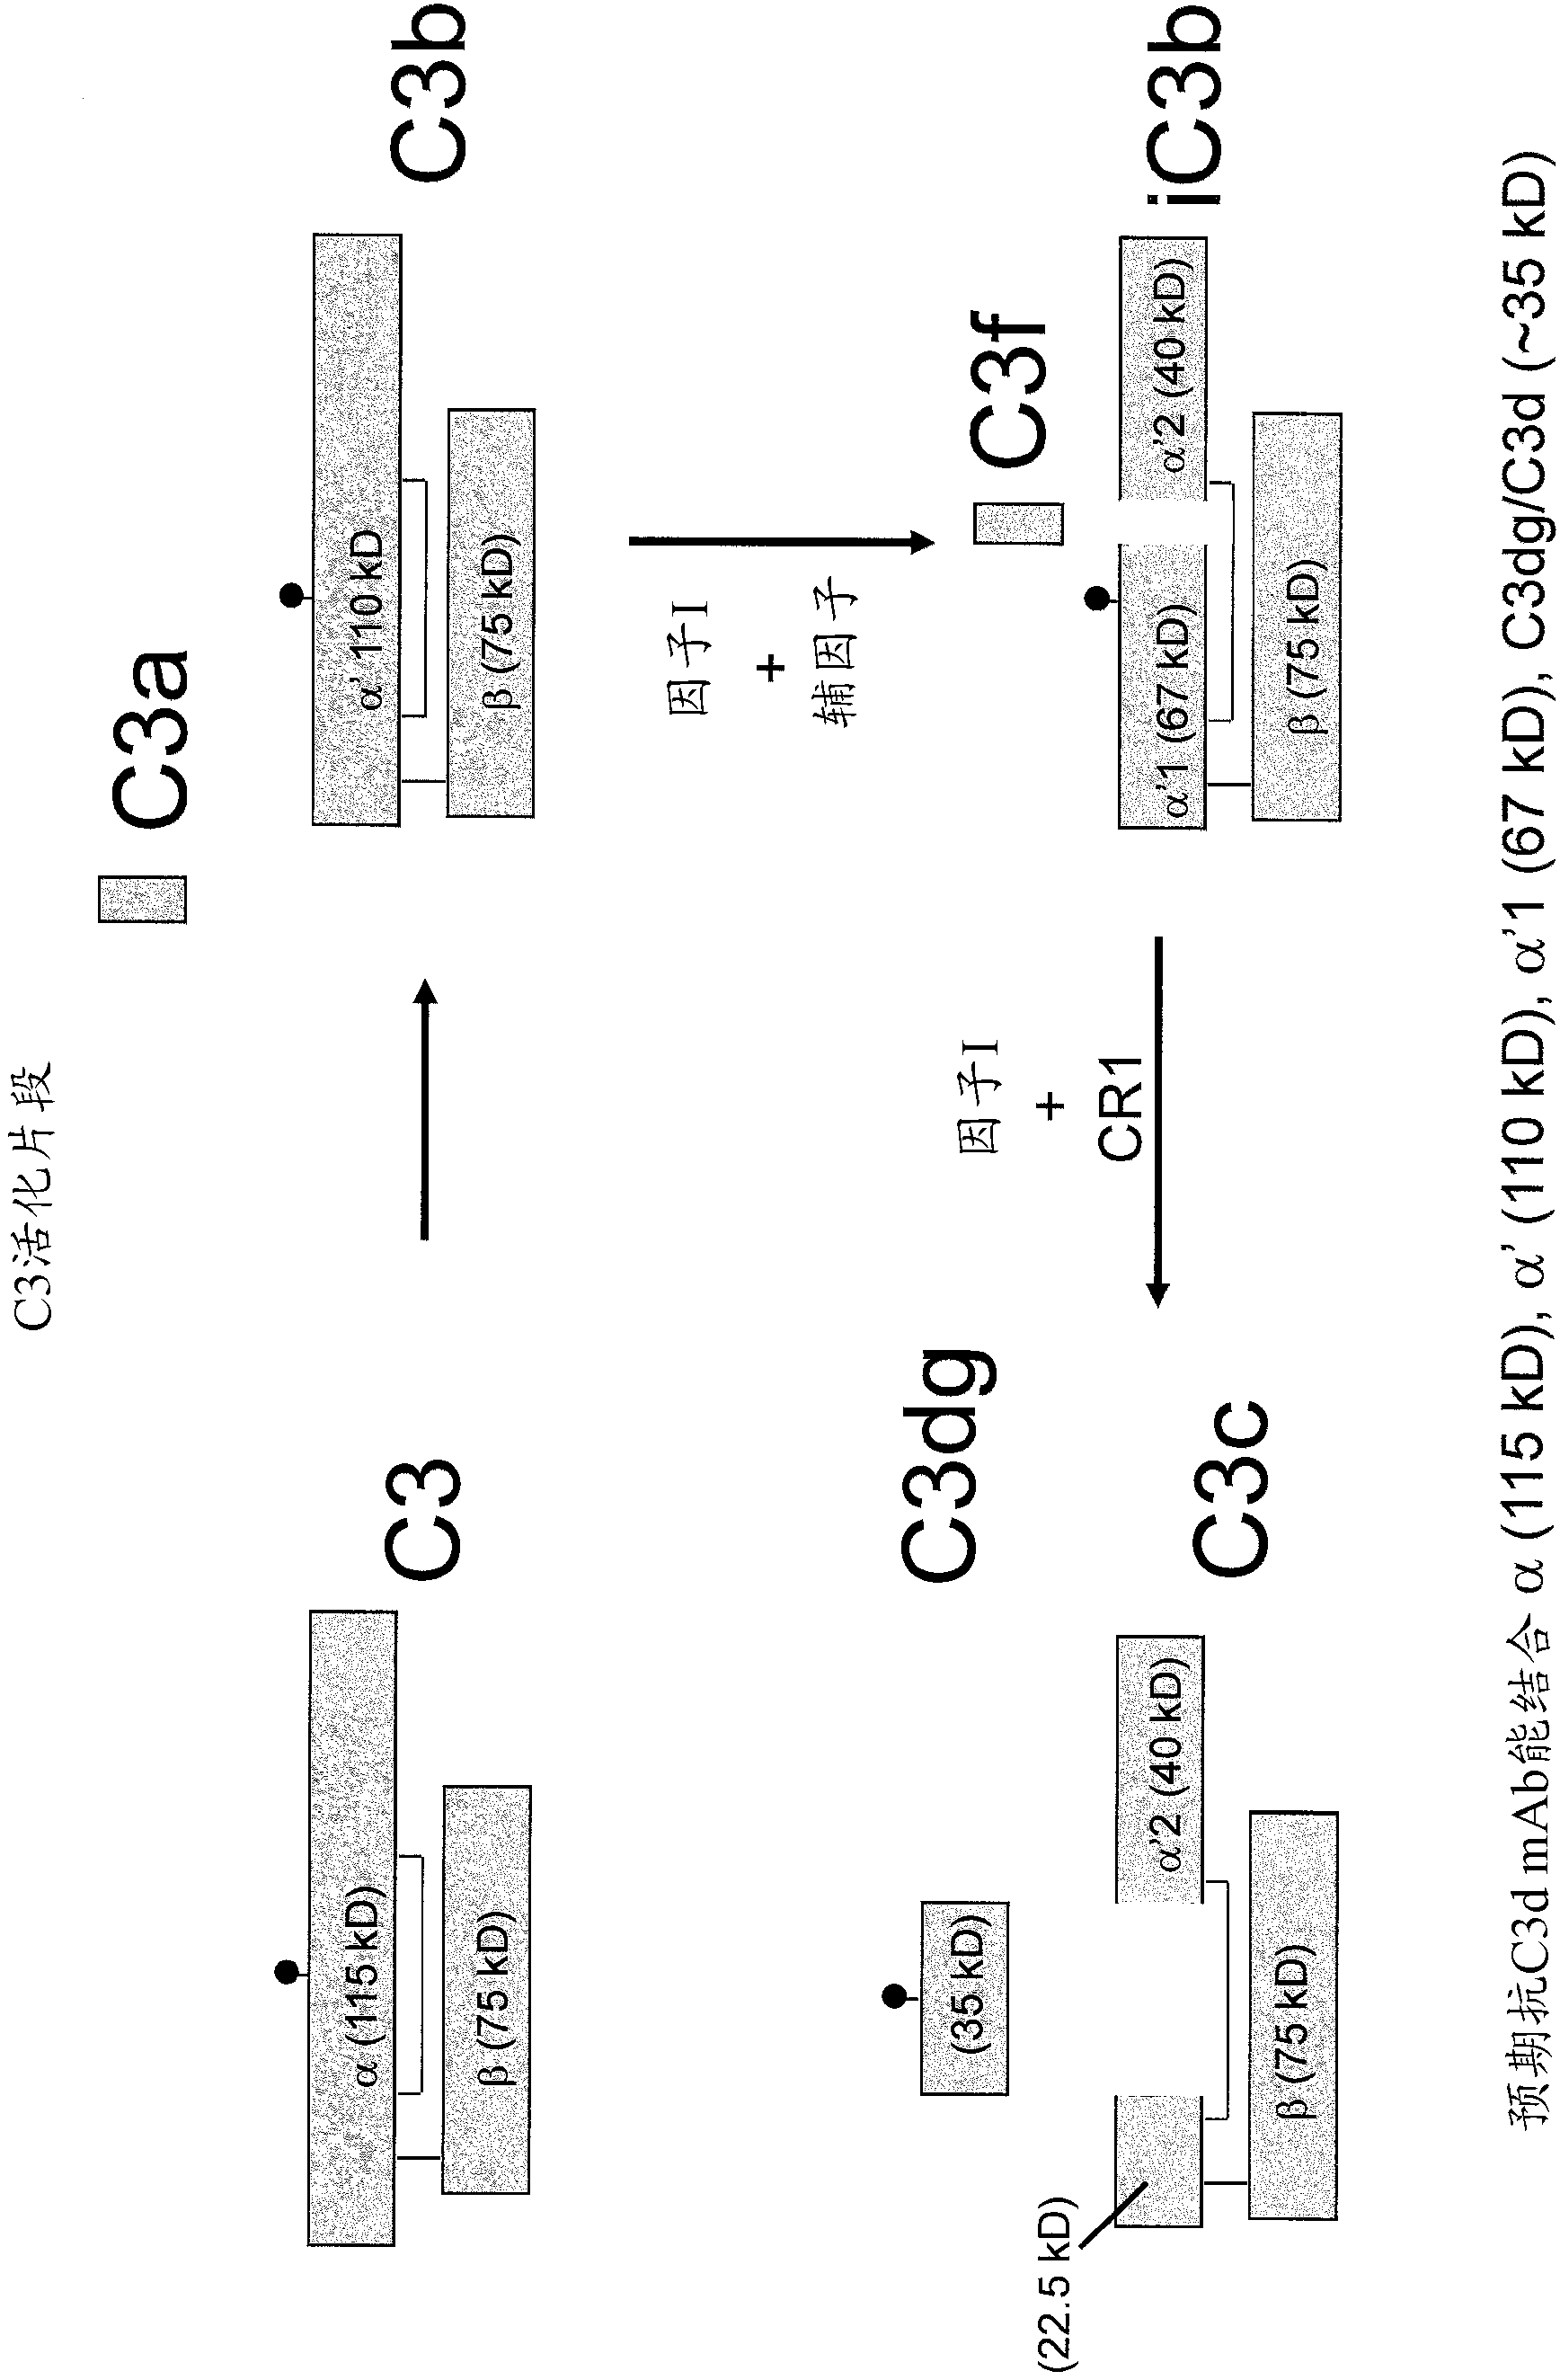 Antibodies to the c3d fragment of complement component 3